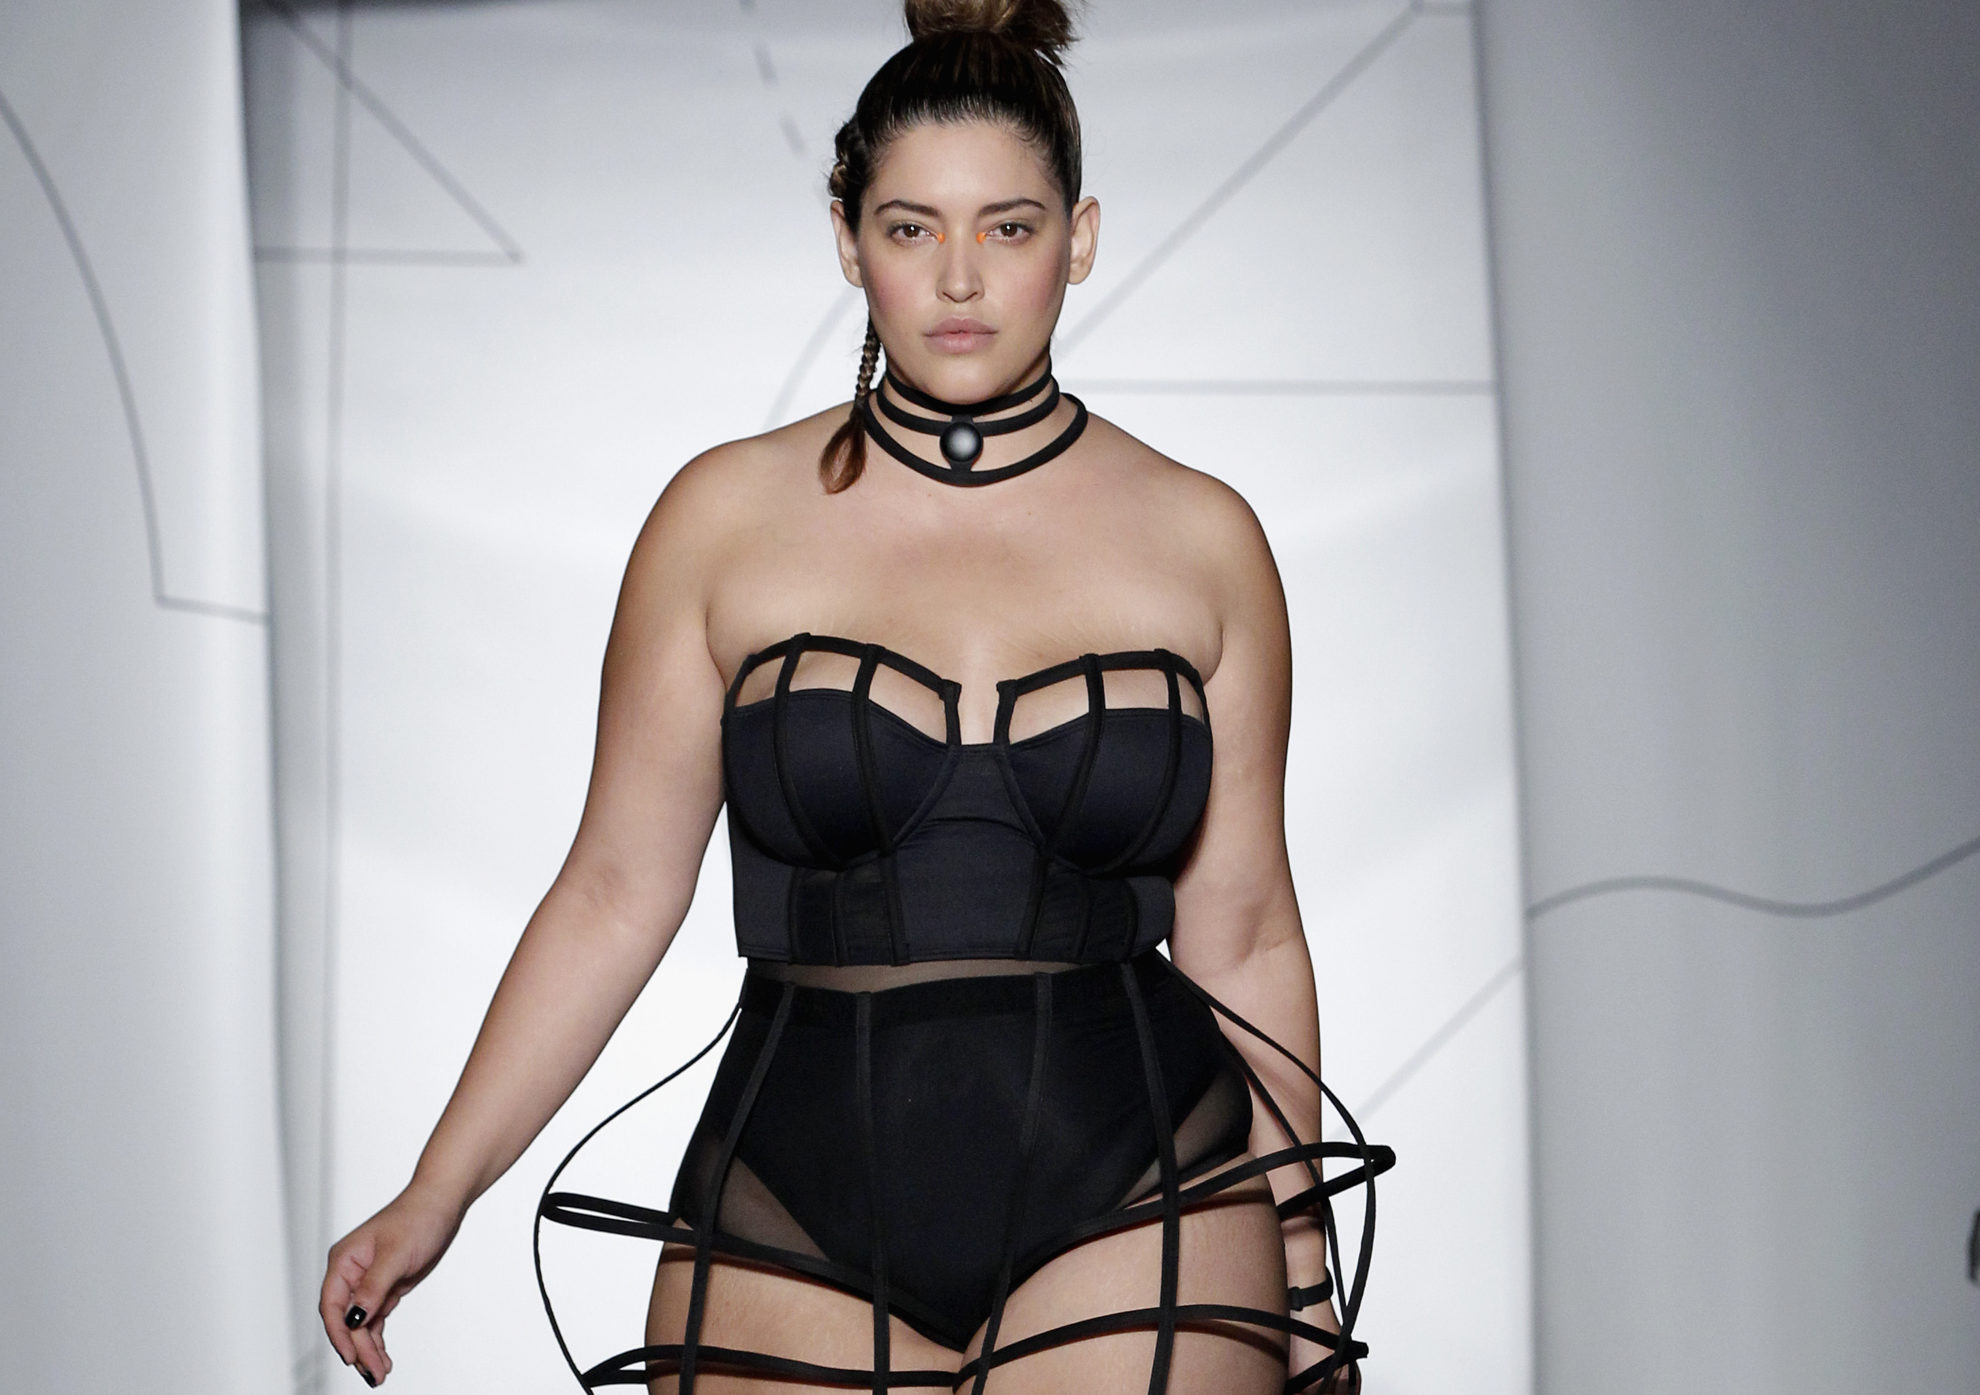 A model walks the runway at the Chromat SS15 Formula 15 fashion show at The Standard Hotel on September 4, 2014 in New York City.